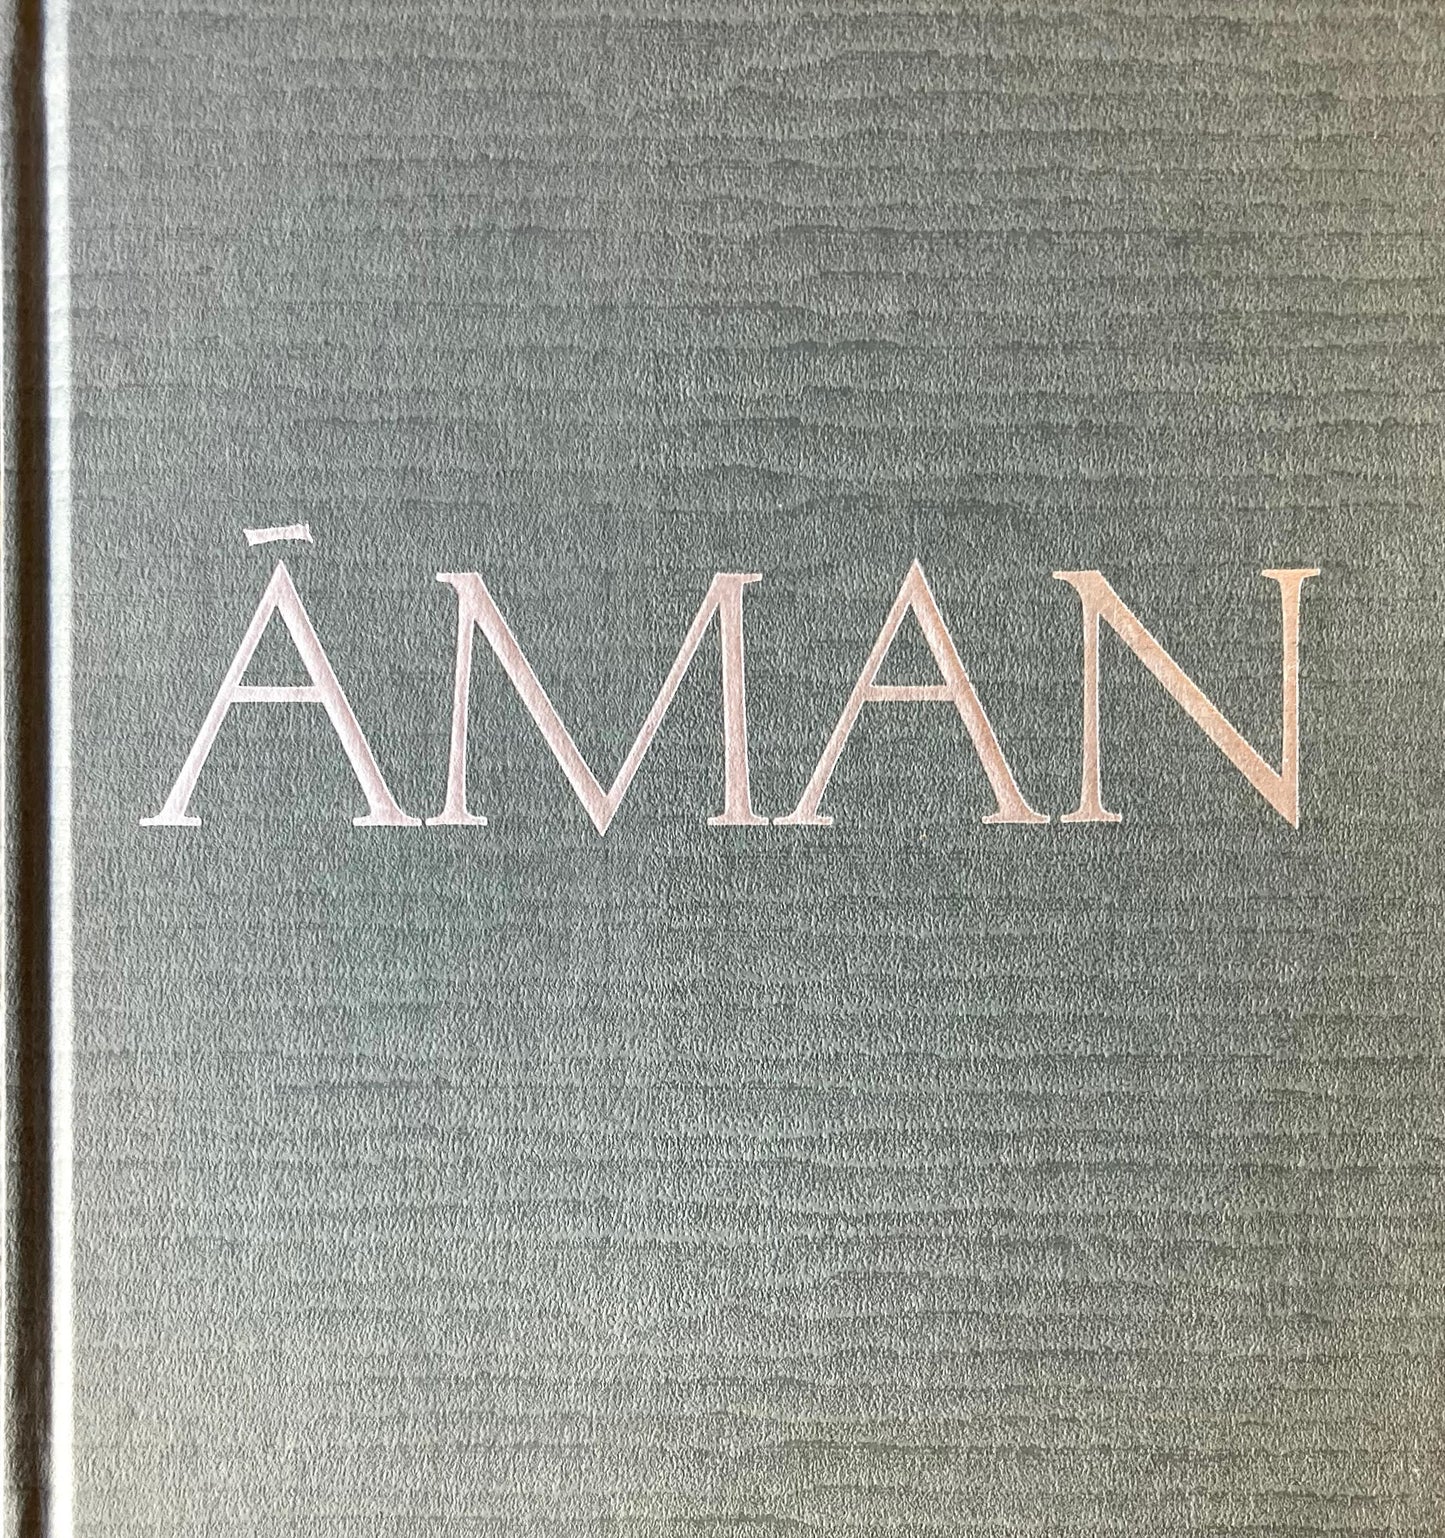 A MAN THE FIRST DECADE A PORTRAIT OF AMANRESORTS BY BASIL PAO